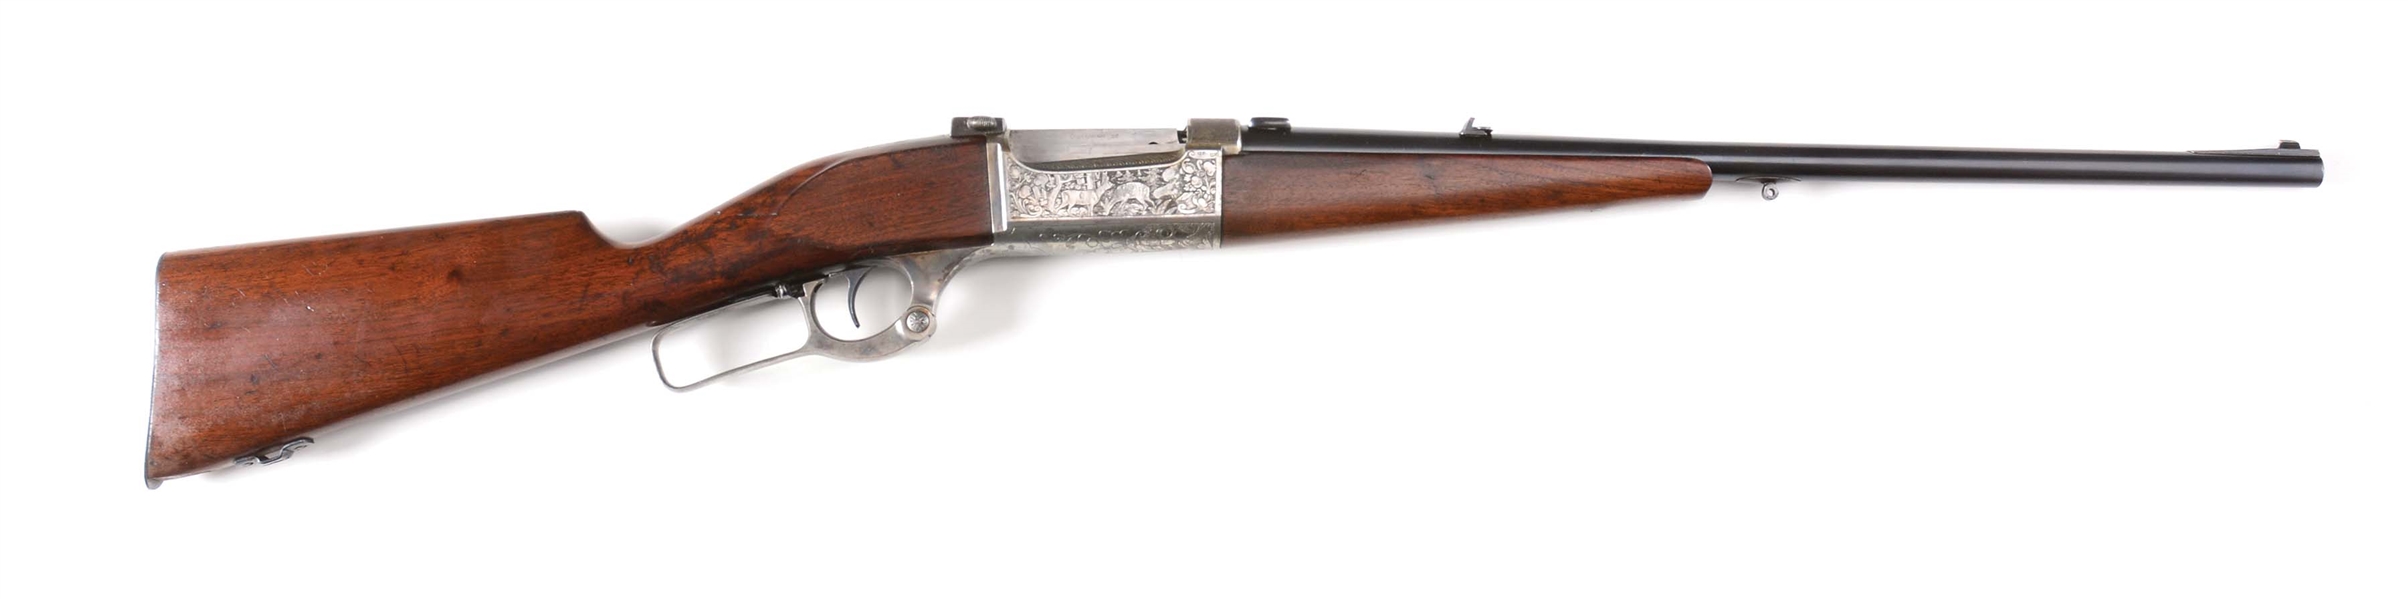 (C) EXQUISITELY ENGRAVED GERMAN EXPORT CUSTOM SAVAGE MODEL 1899 LEVER ACTION RIFLE.